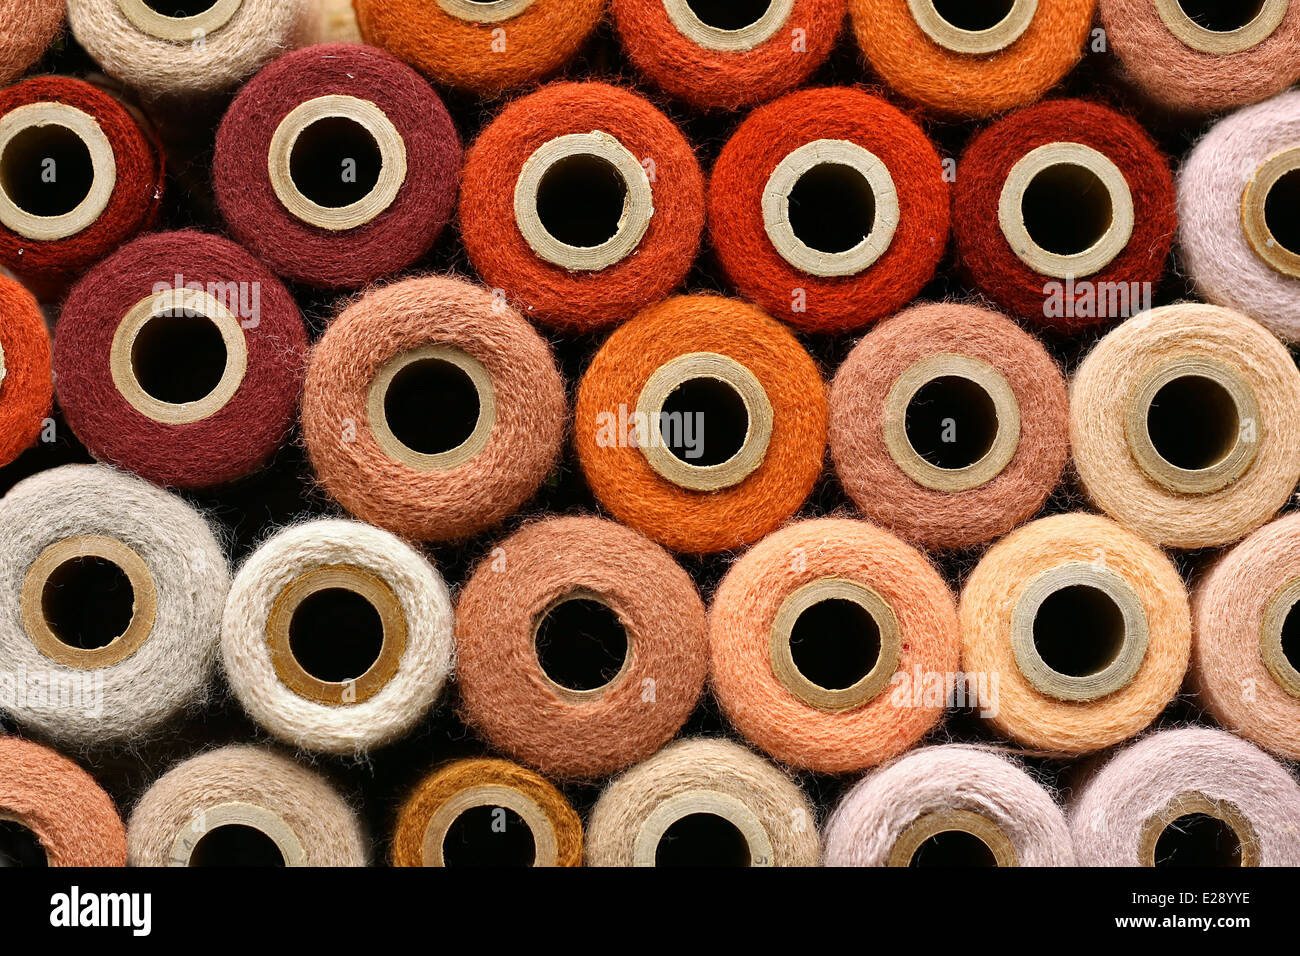 a large collection of Orange and other colorful vintage craft yarn spools gathered as a background. Stock Photo